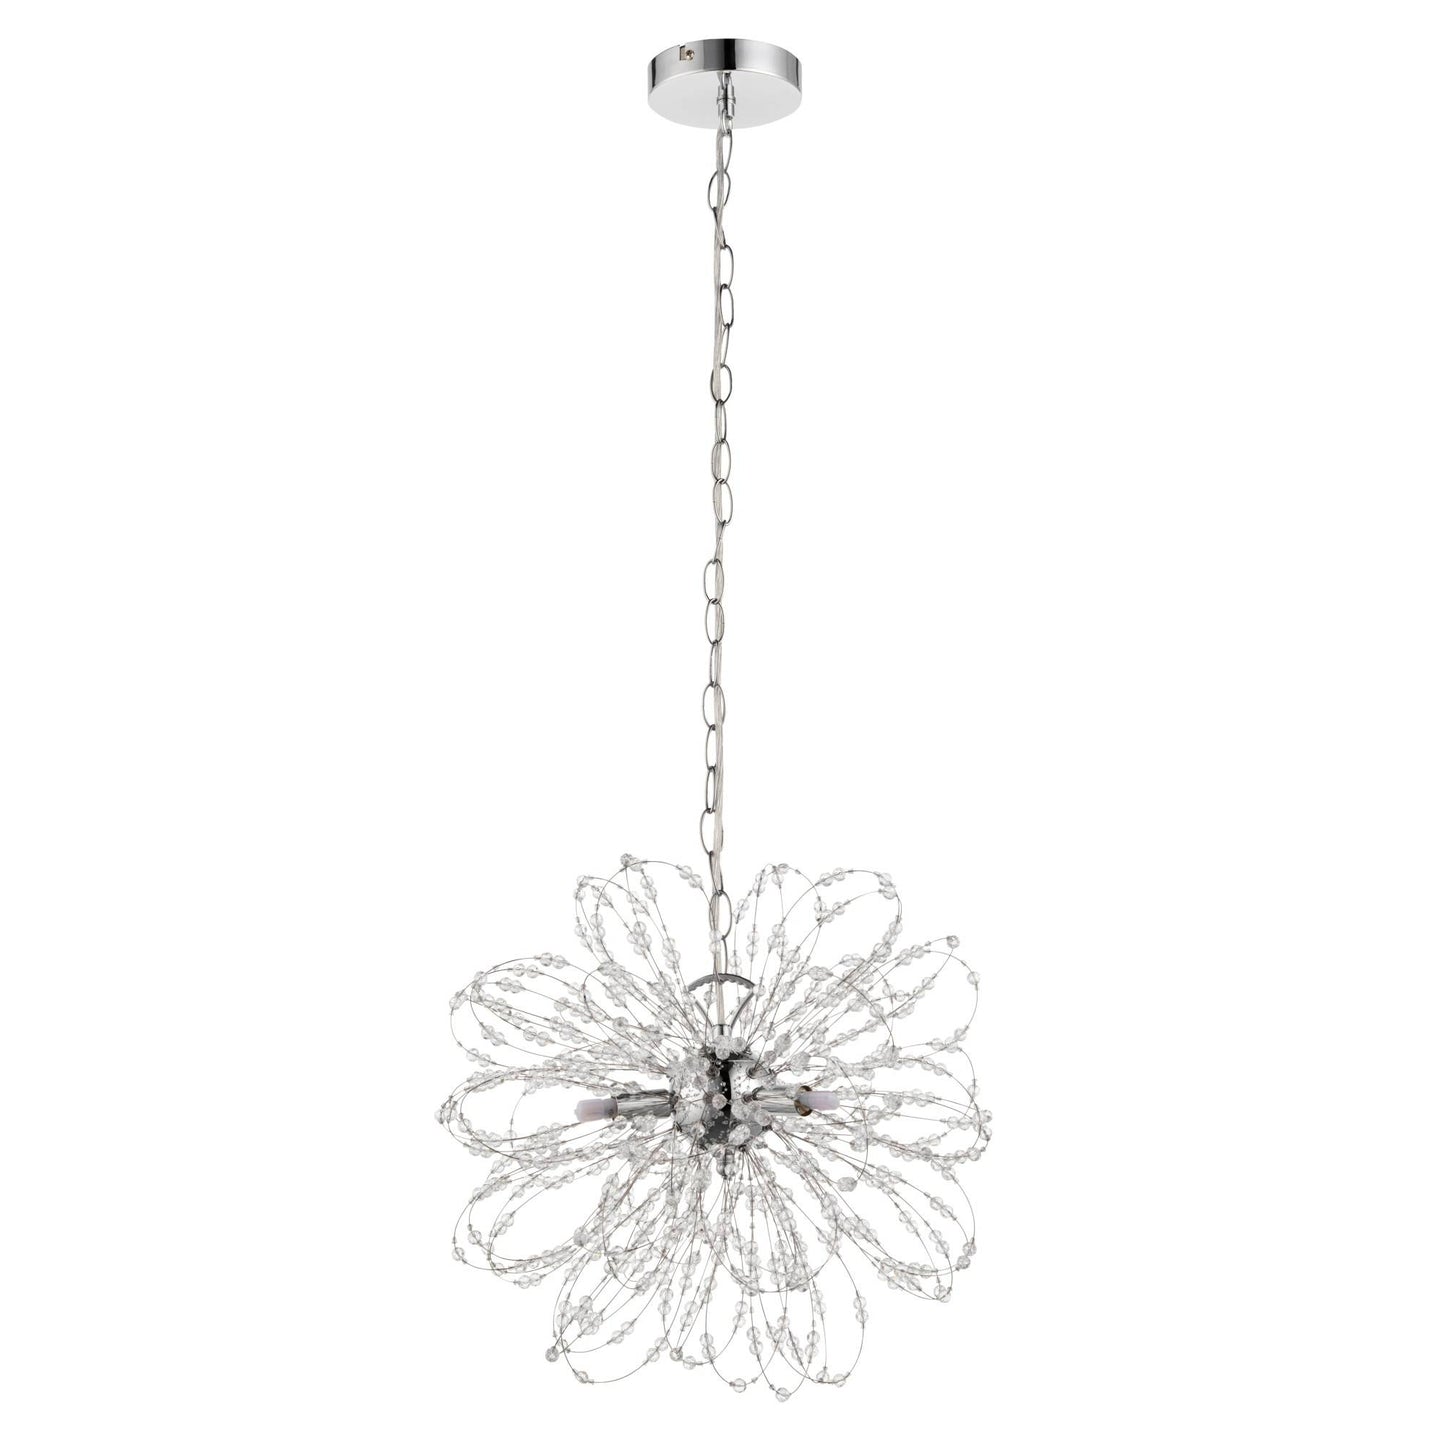 Alula 3 Light Polished Chrome Pendant Ceiling Light with Clear Bead Detailing